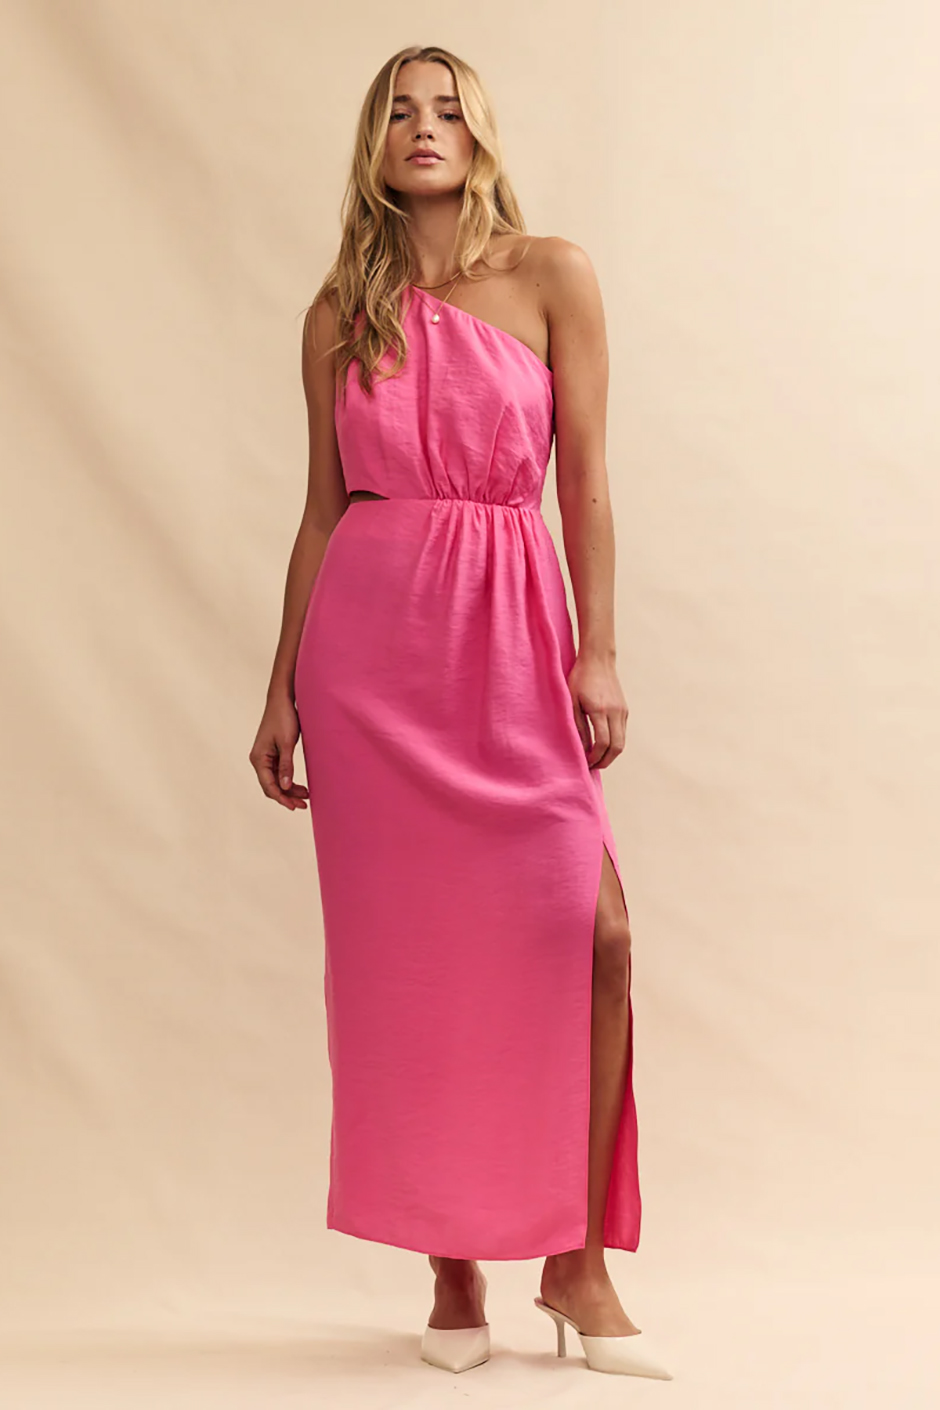 Lightweight one shoulder pink maxi dress with leg split and cut outs from Nobody's Child as summer wedding guest dress idea